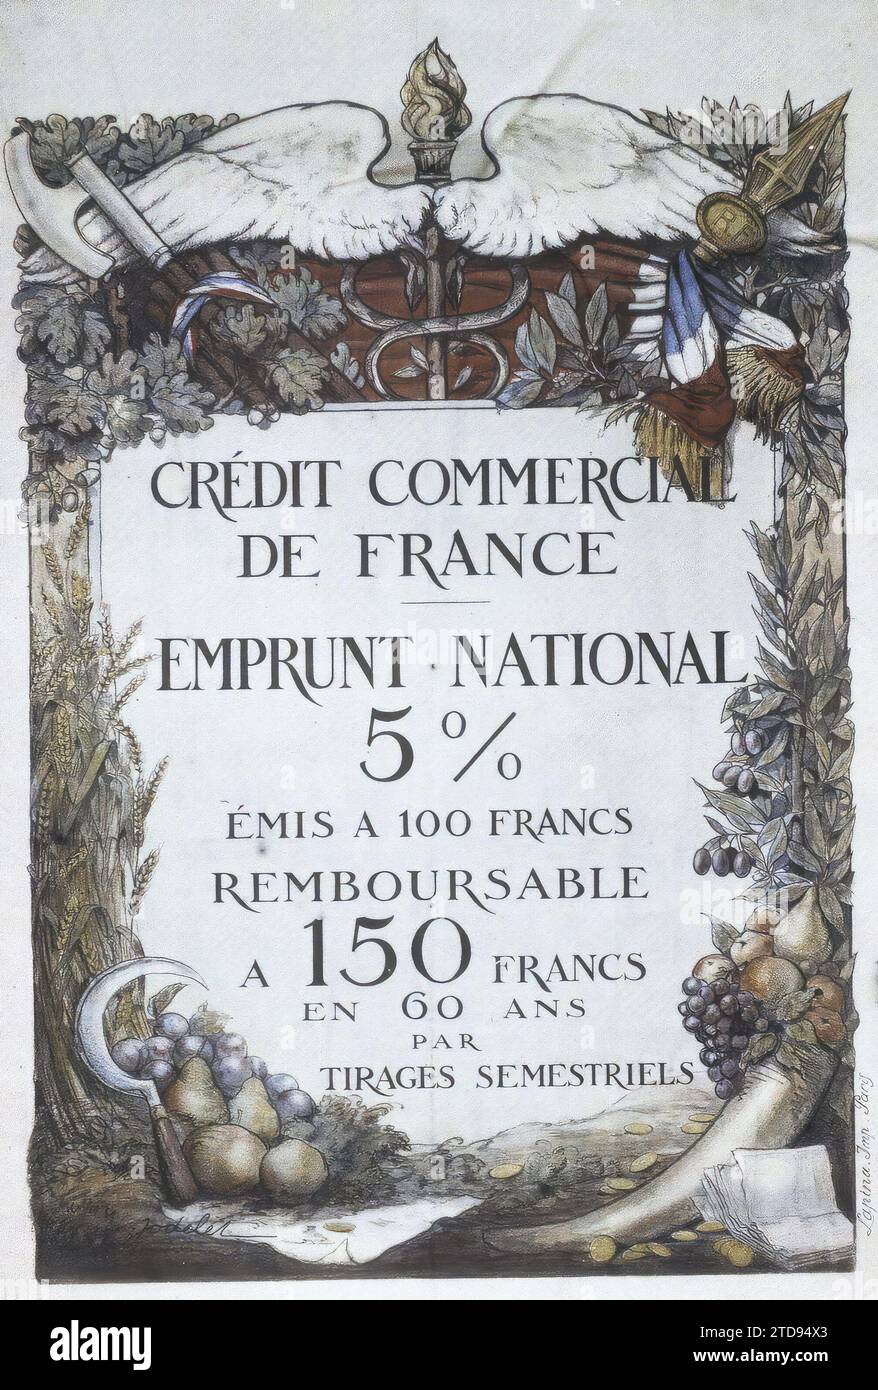 Paris, France Poster of the national loan of 1920, Commercial Credit of France, Economic activity, Registration, information, First World War, Loan, Bank, finances, Poster, War effort, war work, France, Paris, Posters Loan Nal 1920 Crédit Commercial de France, Paris, 26/02/1920 - 26/02/1920, Léon, Auguste, photographer, Autochrome, photo, Glass, Autochrome, photo, Positive, Vertical, Size 9 x 12 cm Stock Photo